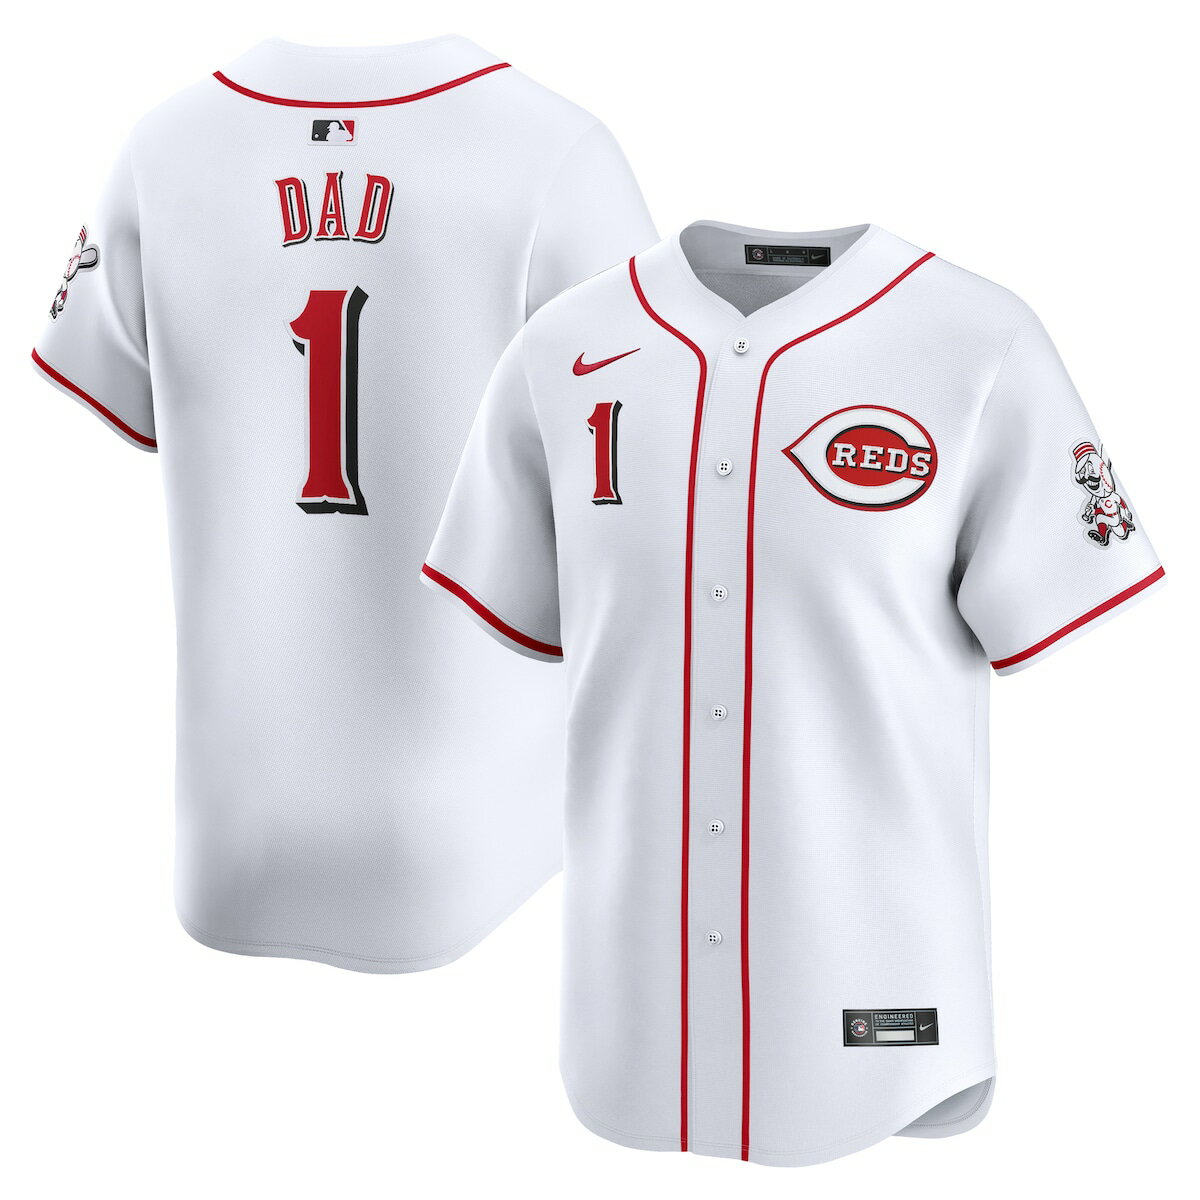 MLB bY z[ ~ebh jtH[ Nike iCL Y zCg (2024 Men's Ltd Father's Day #1 Dad APP - FTF NTP Master Style)